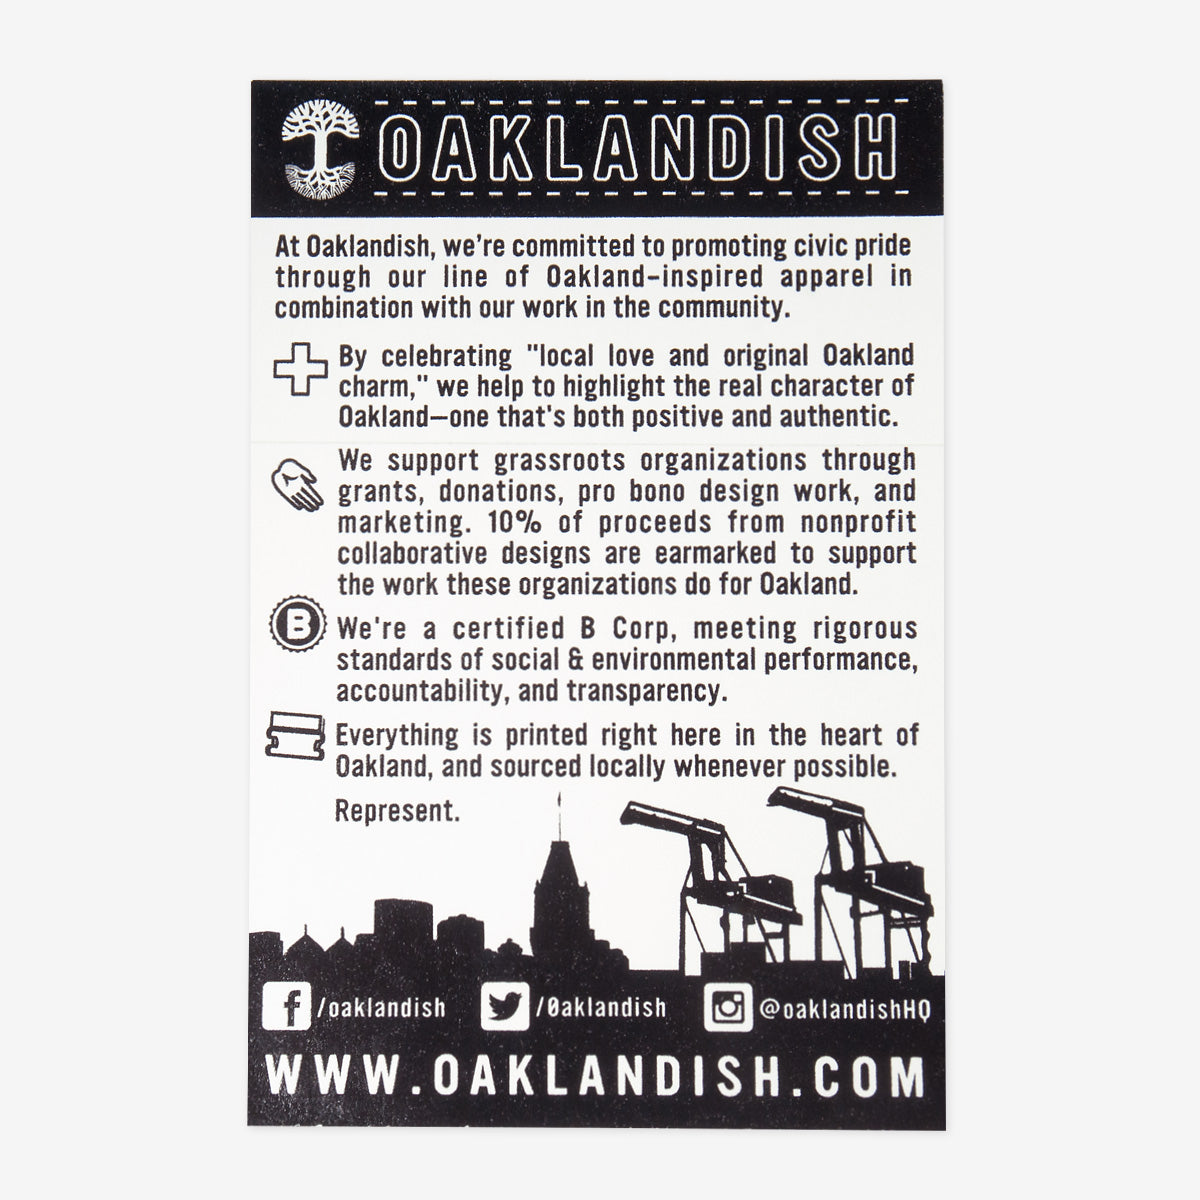 The back side of an Oaklandish sticker with the Oaklandish mission statement printed on it.